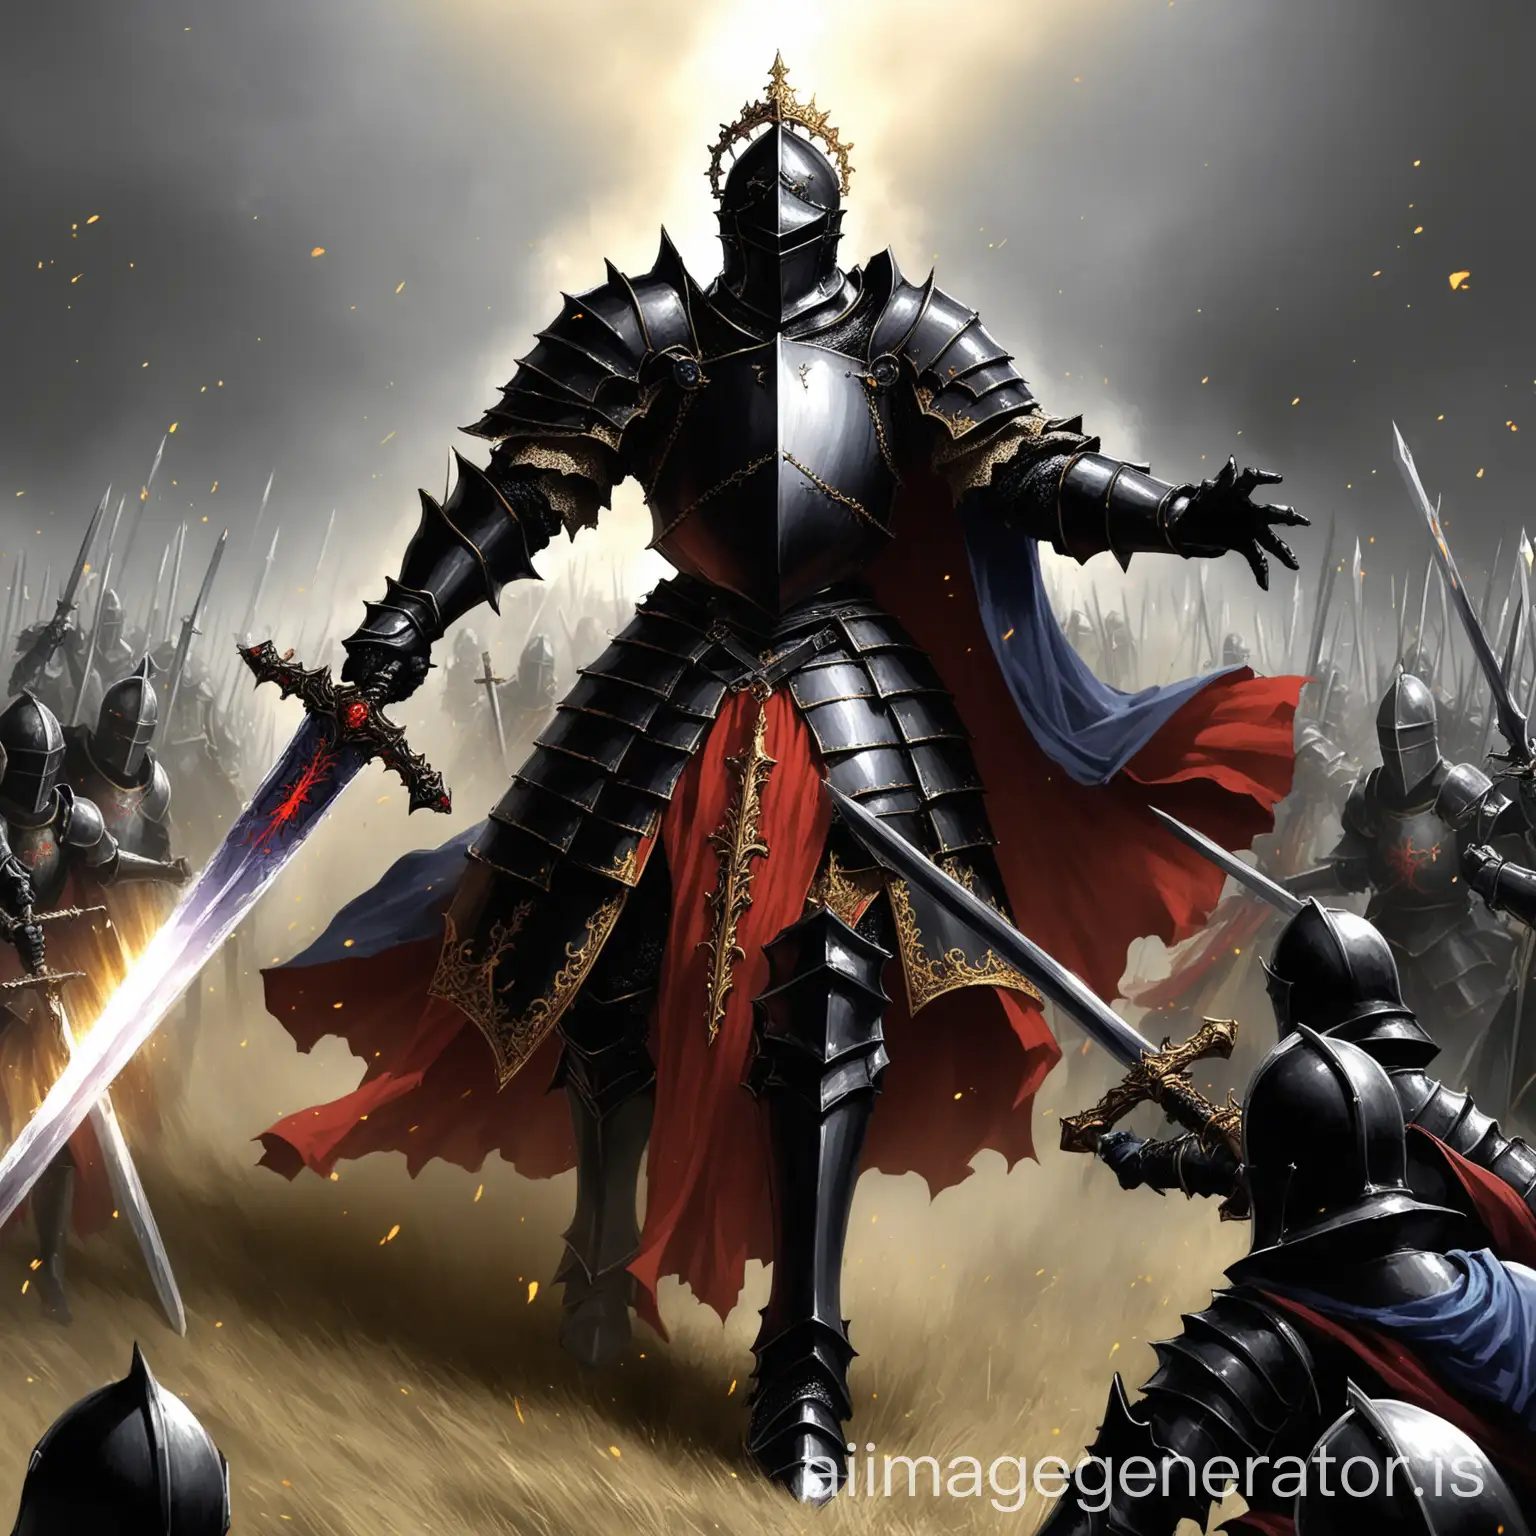 Black-Knight-Leading-Charge-with-Great-Sword